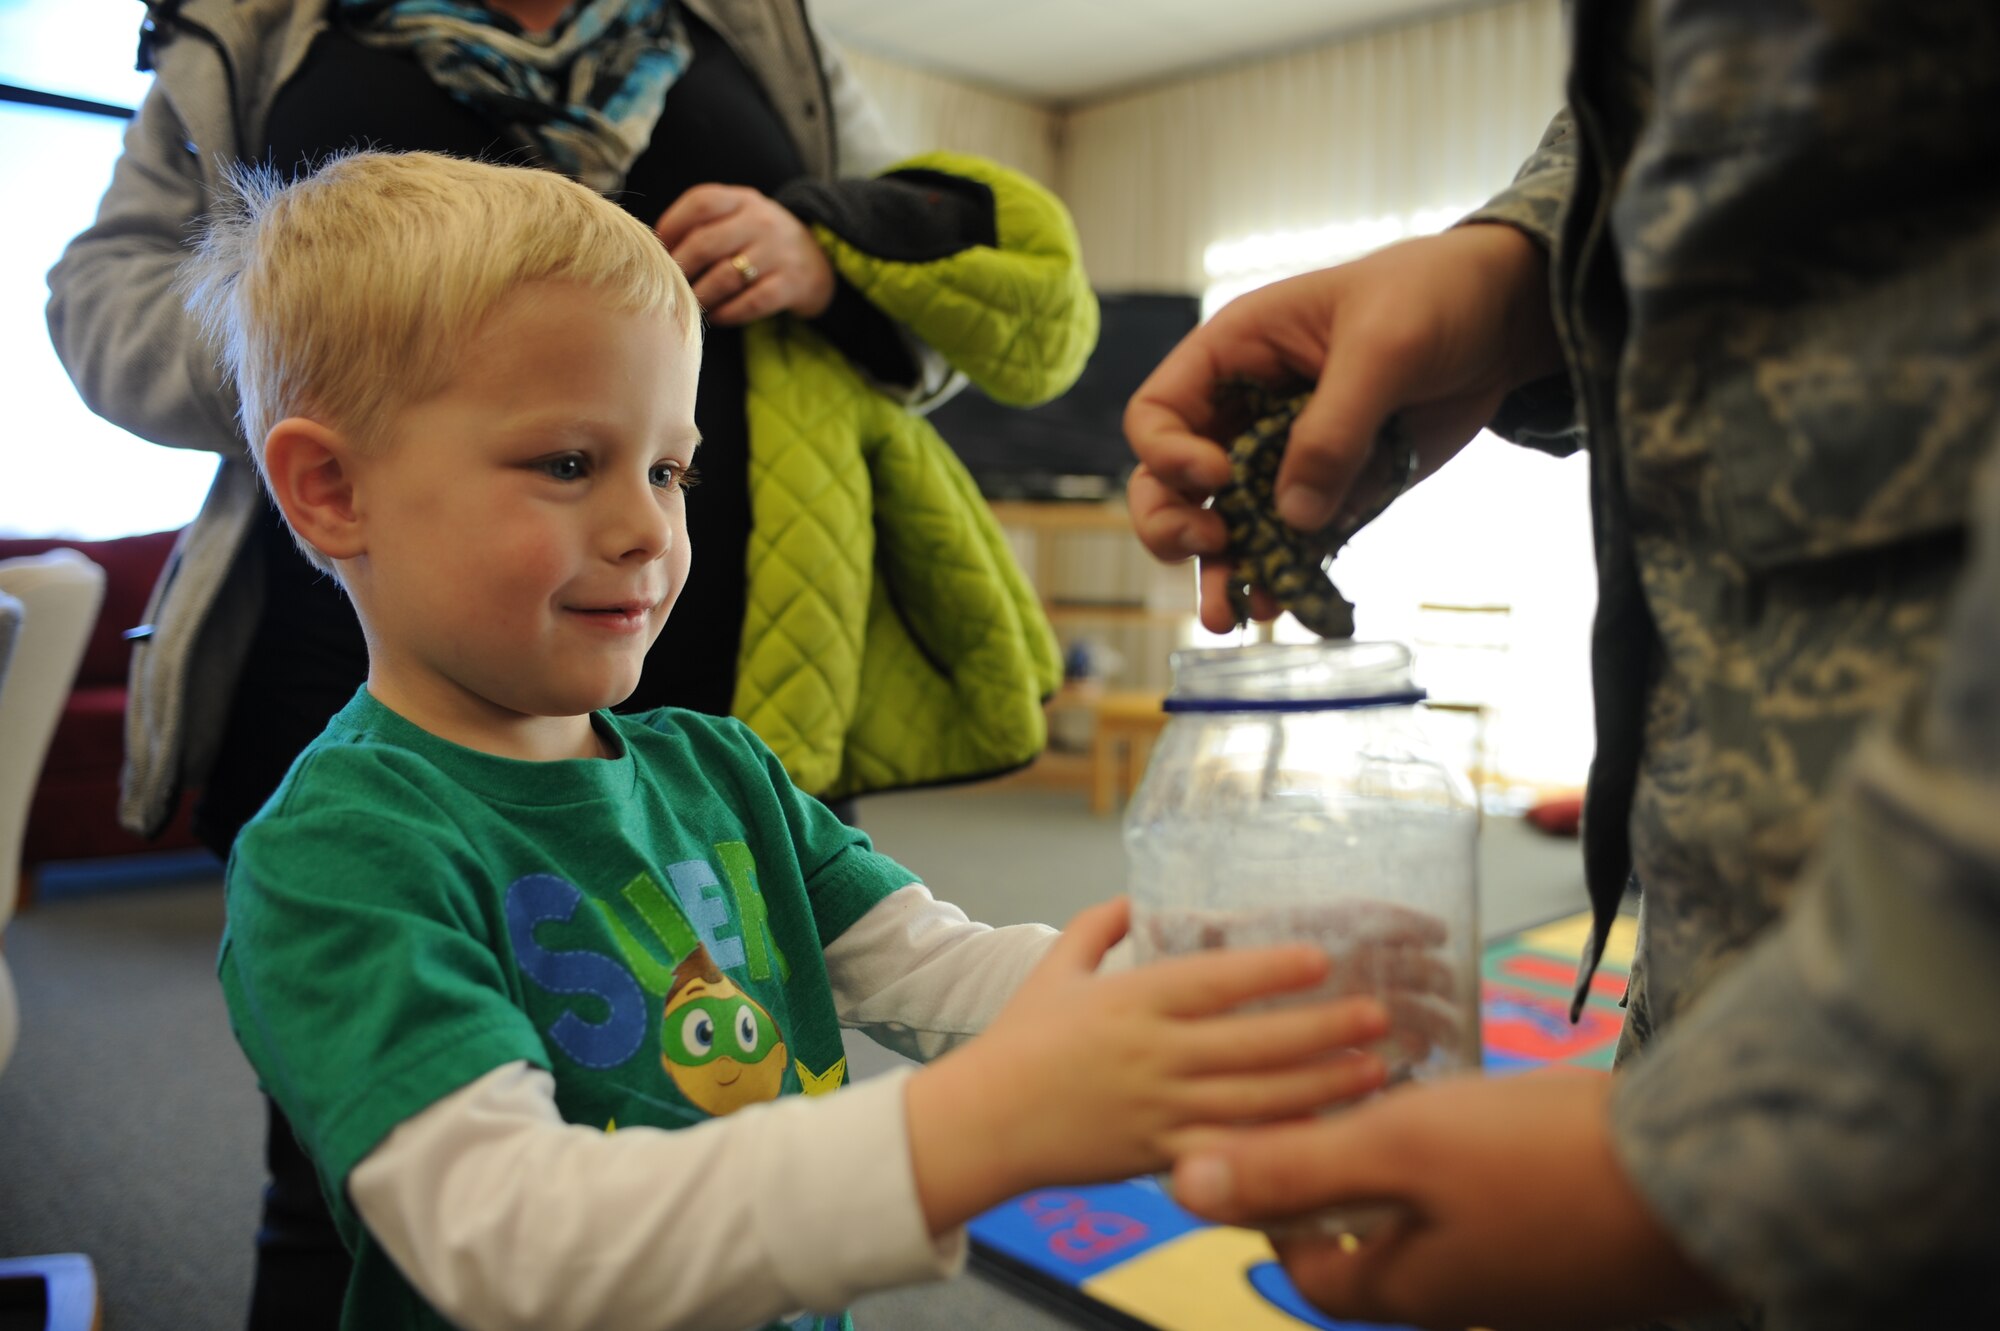 Nolan Trautner gets a closer look at a salamander while attending Little Warriors Story Time at the Holbrook Library at Ellsworth Air Force Base, S.D., Nov. 19, 2015. The library holds three programs that aim to equip children with knowledge and promote literacy and socialization. For more information about these and other library programs, call (605) 385-1688. (U.S. Air Force photo by Airman Sadie Colbert/Released)